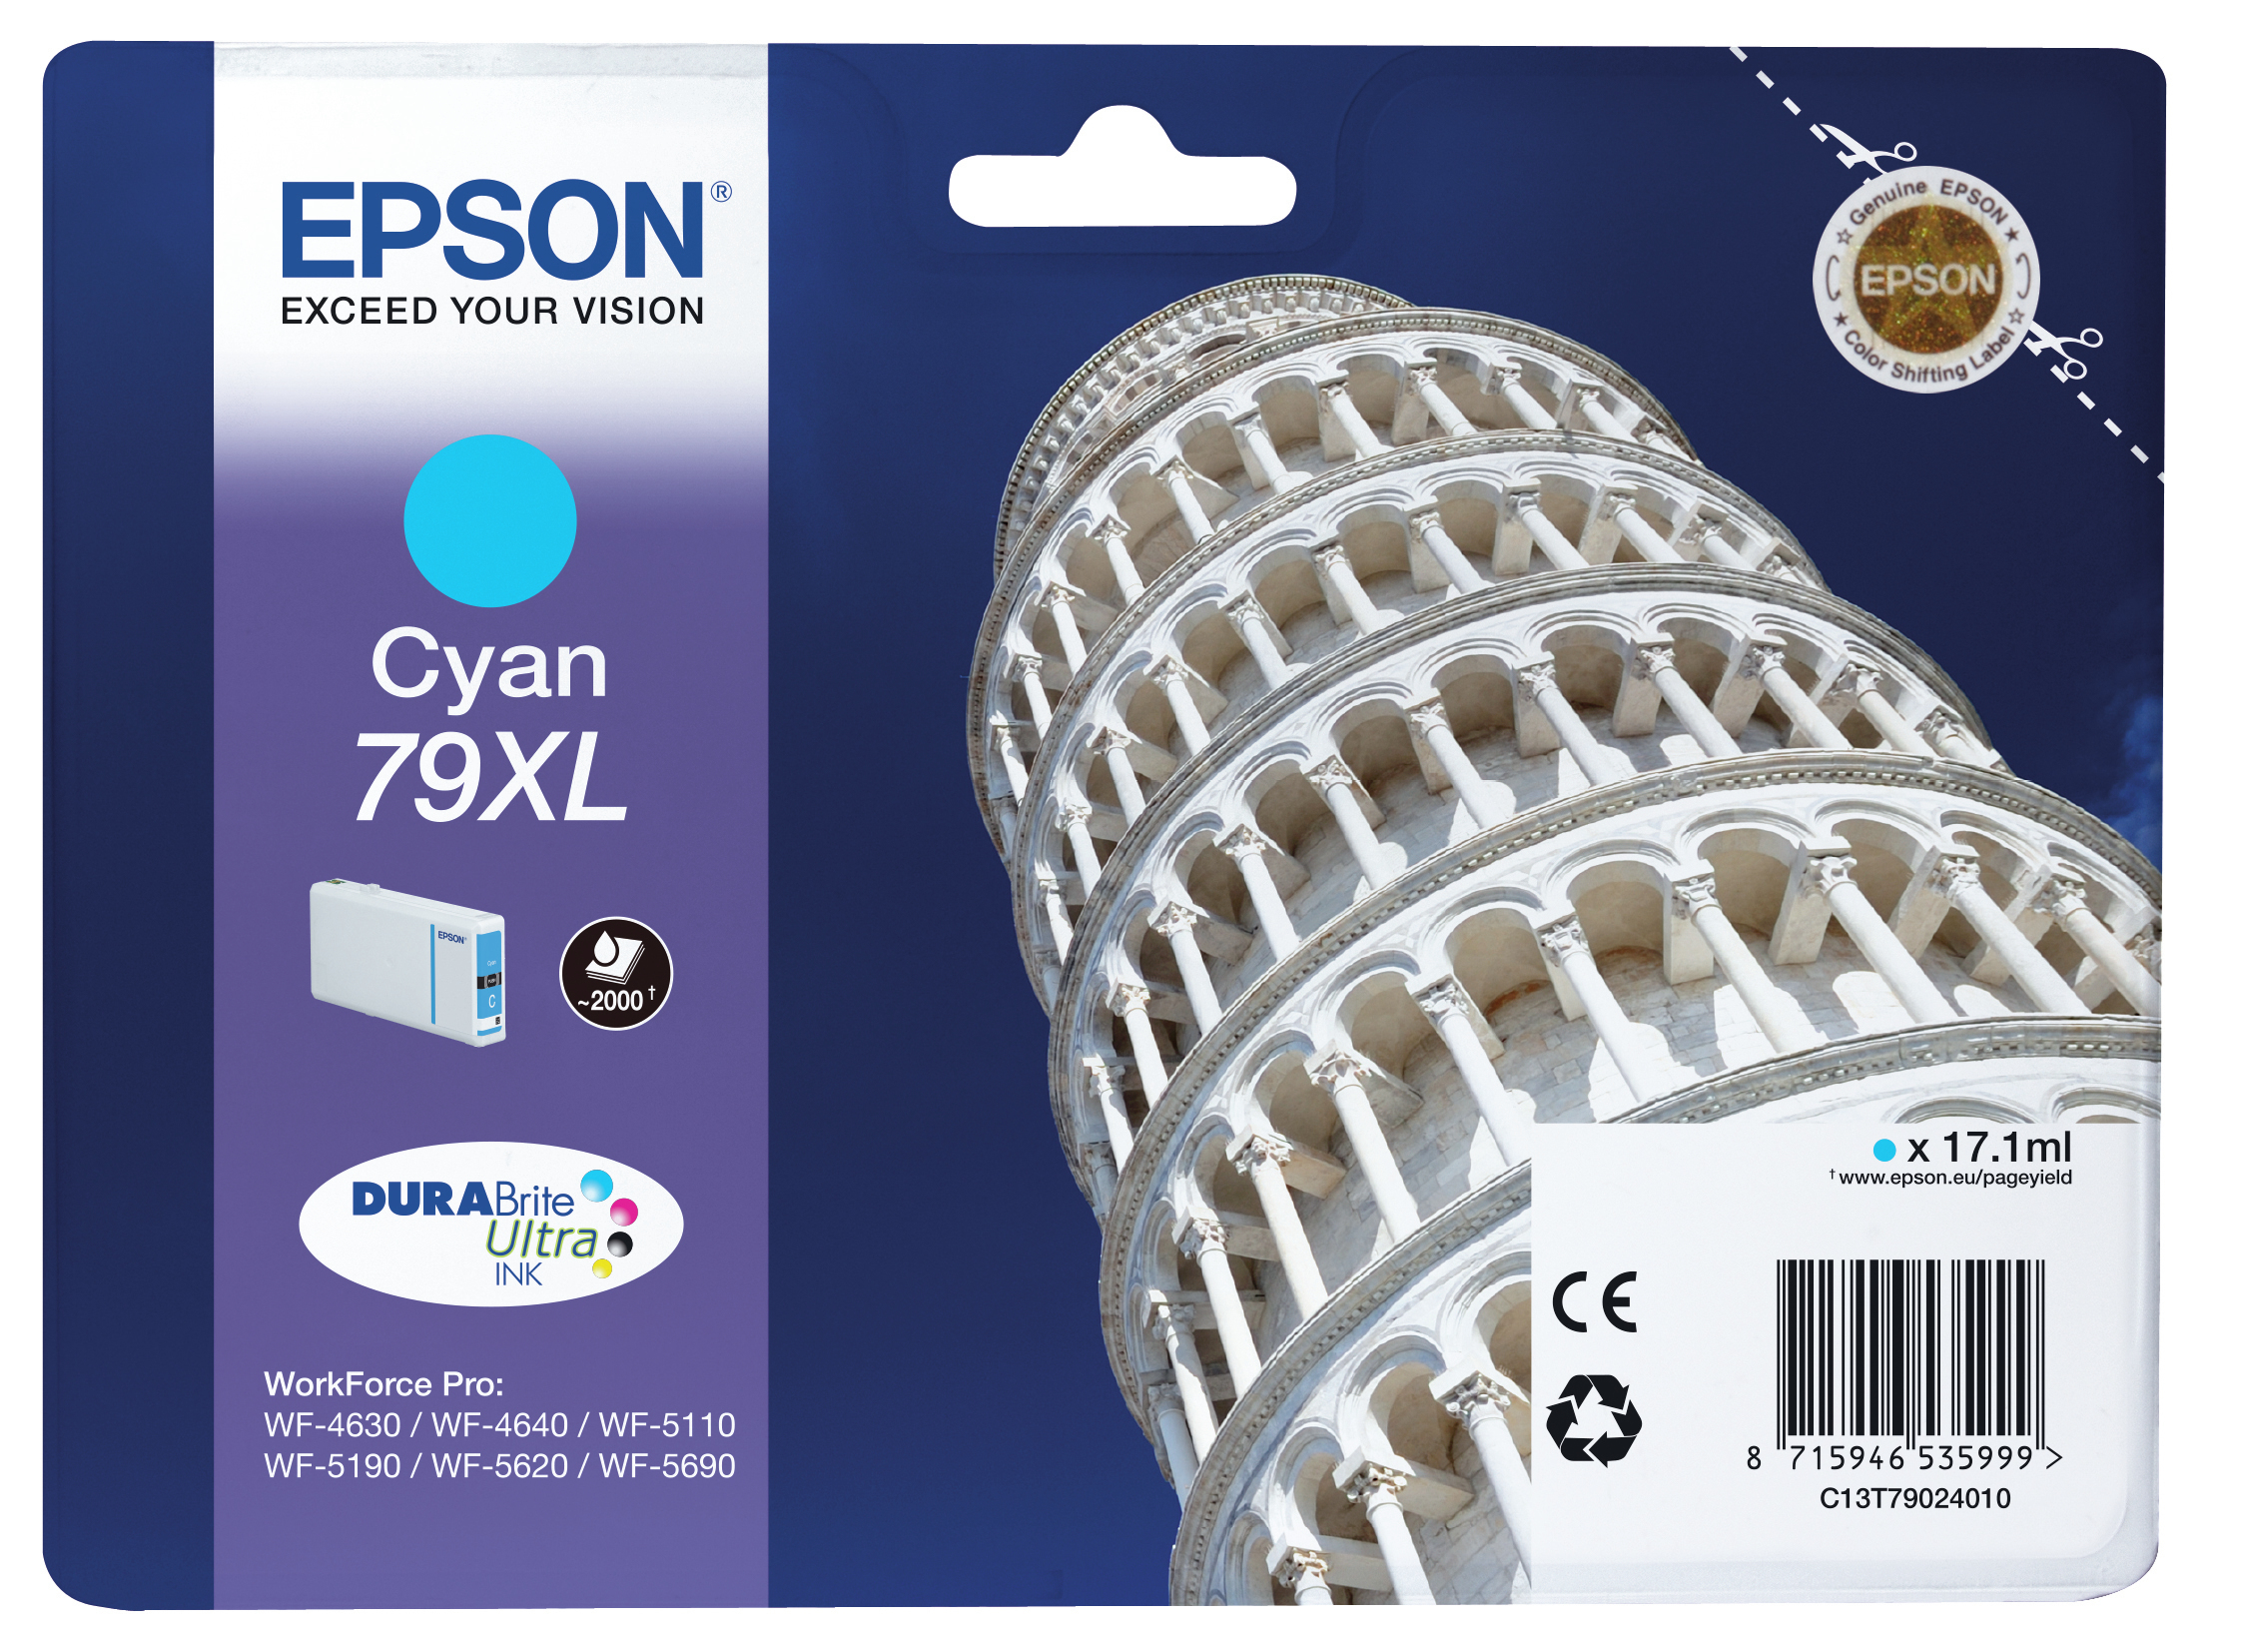 Cartuccia Ciano N 79xl Epson Business Ink S3 C13t79024010 8715946535999